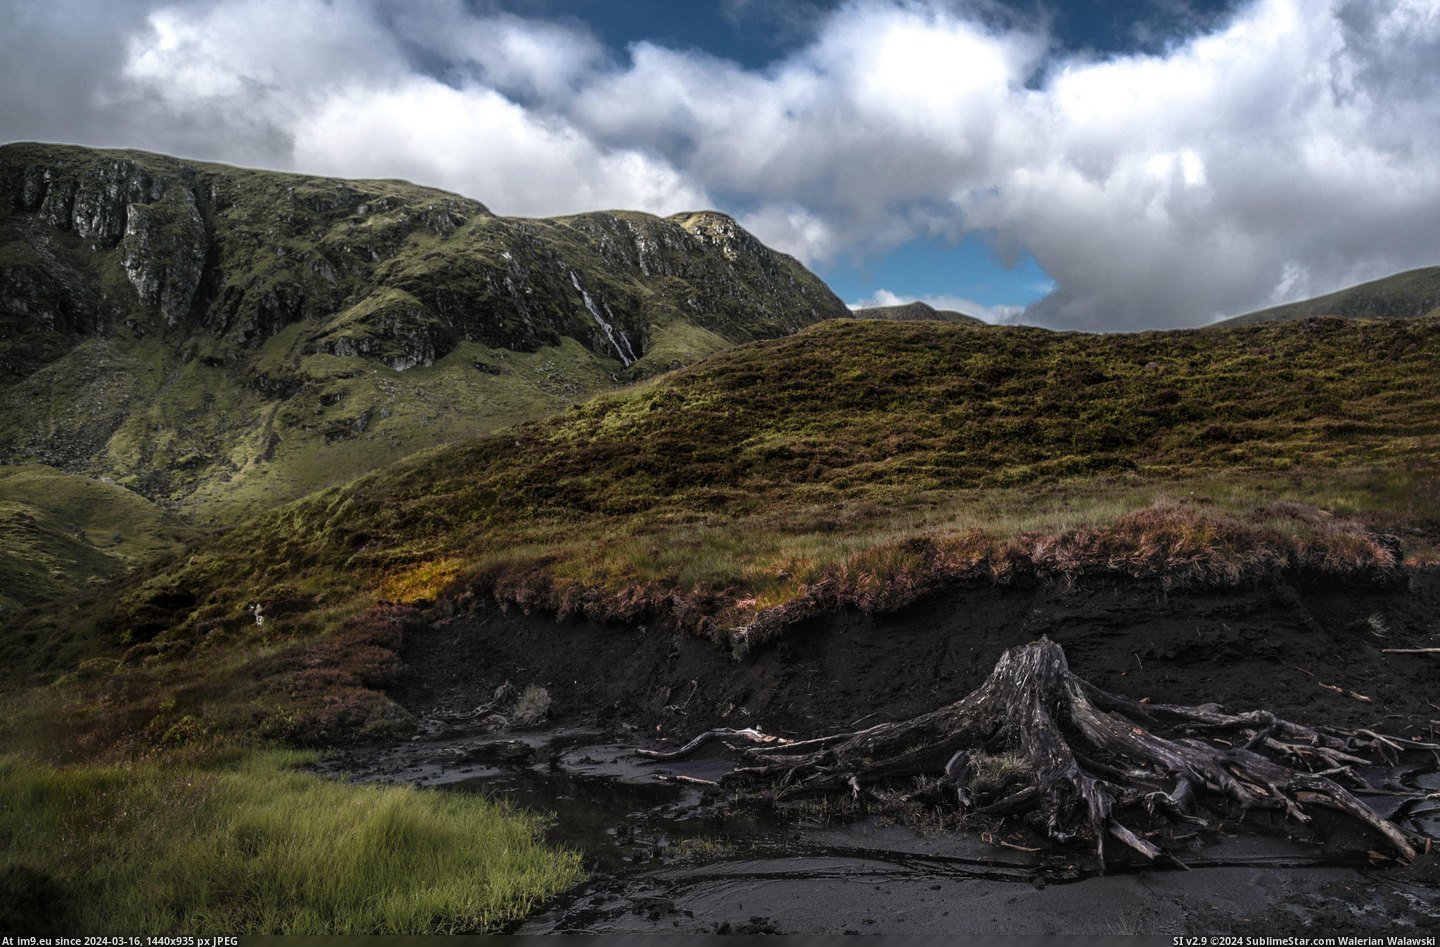 #Tree #Walking #Highlands #Stumbled #Root #Fitting [Earthporn] Walking up the highlands in my Kilt I stumbled upon a tree root which I though would be very fitting on Earthporn -  Pic. (Изображение из альбом My r/EARTHPORN favs))